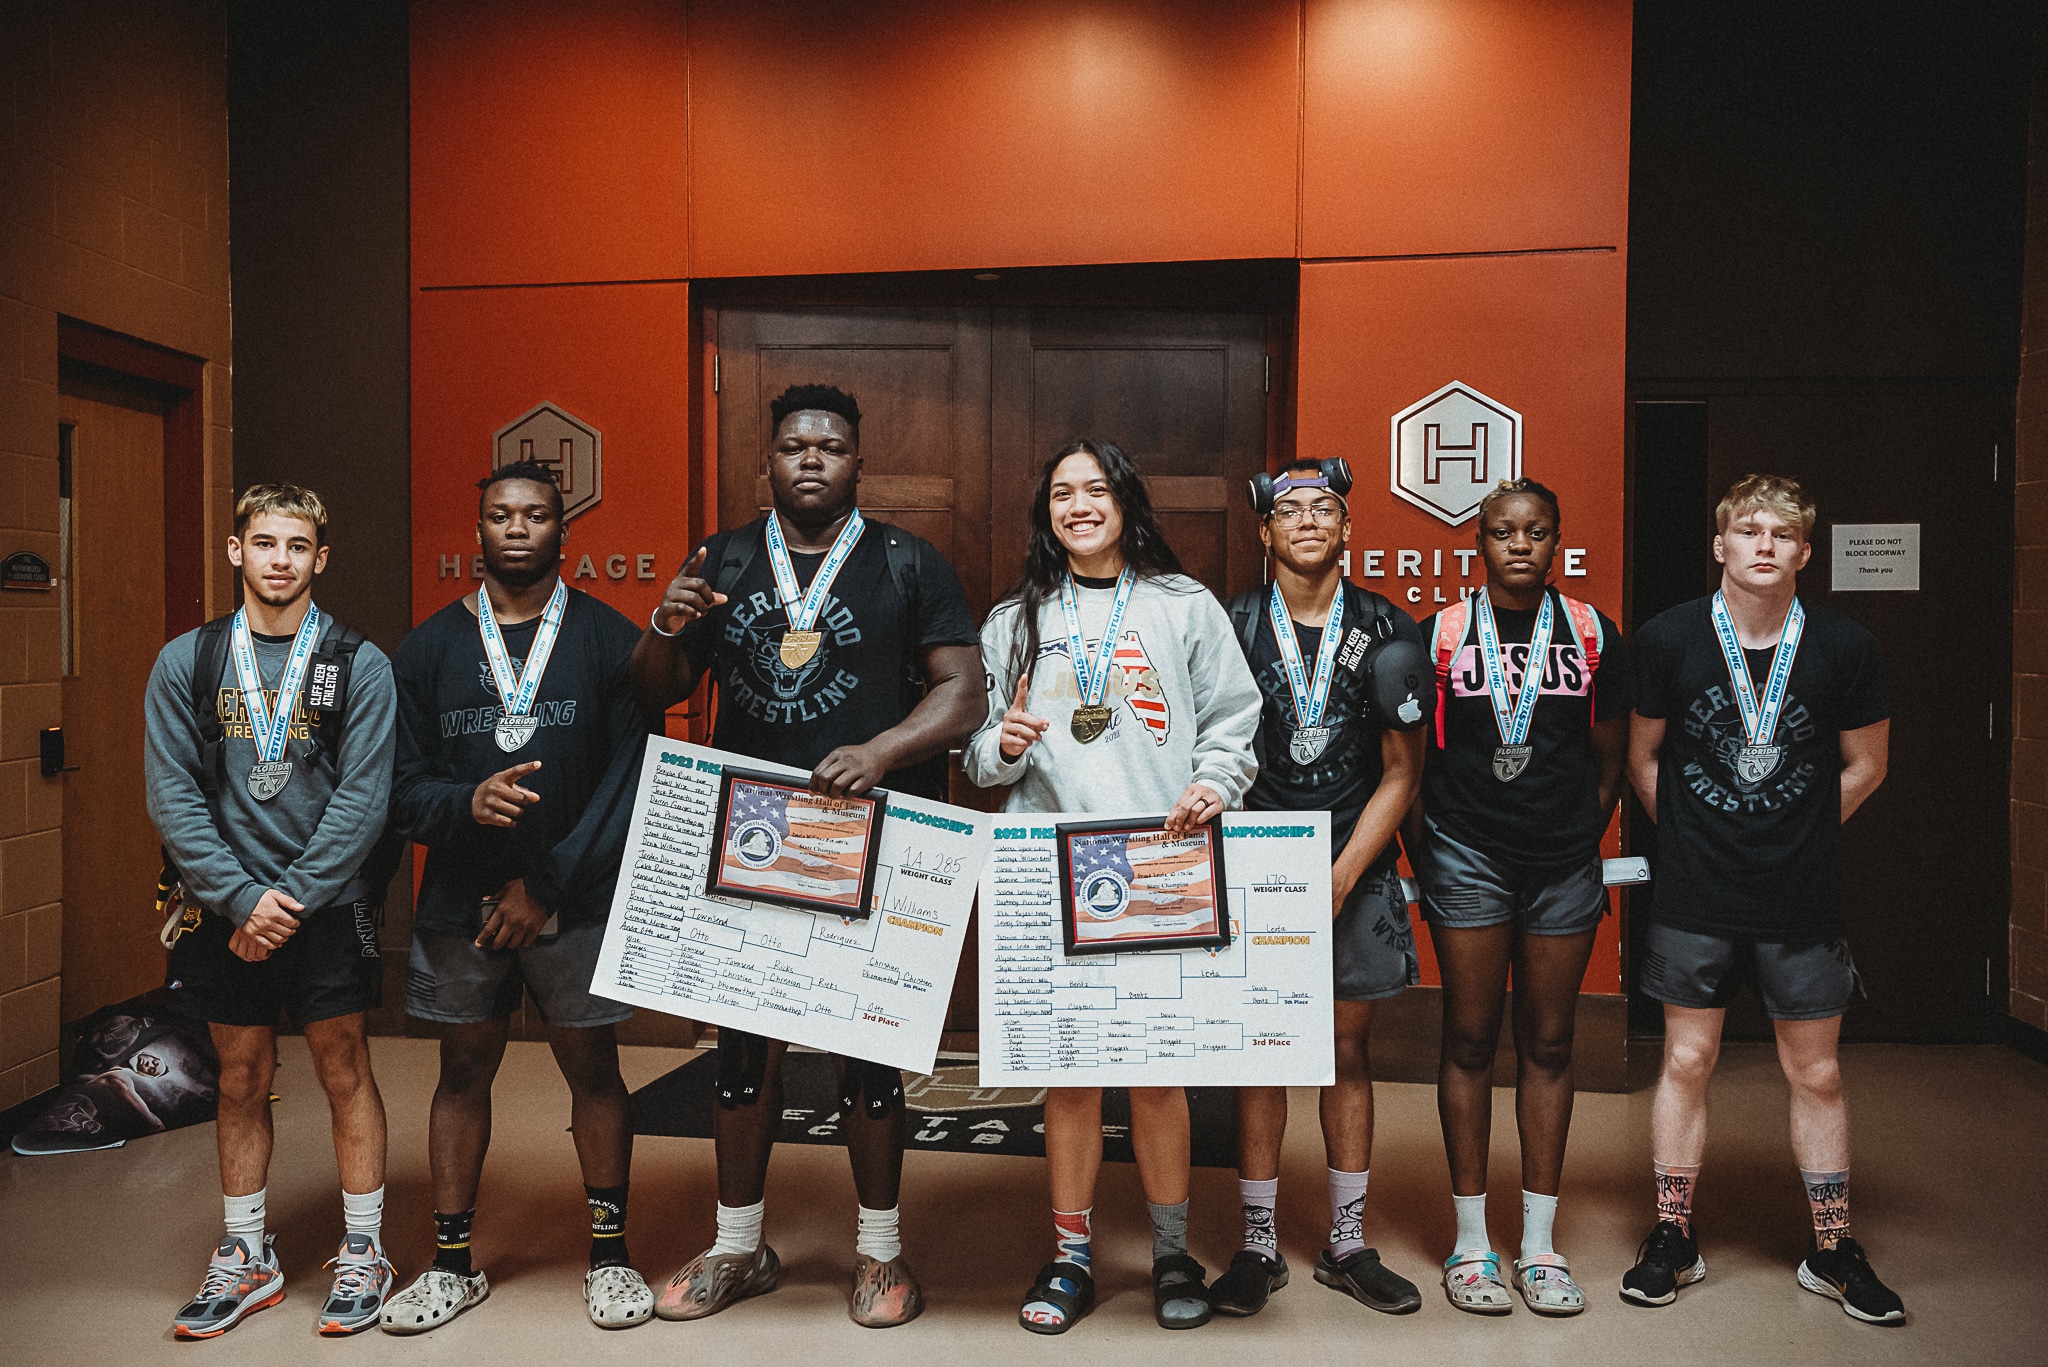 Hernando High School State Placers. Left to Right: Jordyn Valle 4th place, Jayshawn Nantce 6th place, Devin Williams State Champion, Grace Leota State Champion, James Gadson 4th place, Olivia Brown 8th place, TJ Rodier 6th place. 2023 State Championships, Kissimmee , Fla. Photo by Cynthia Leota.